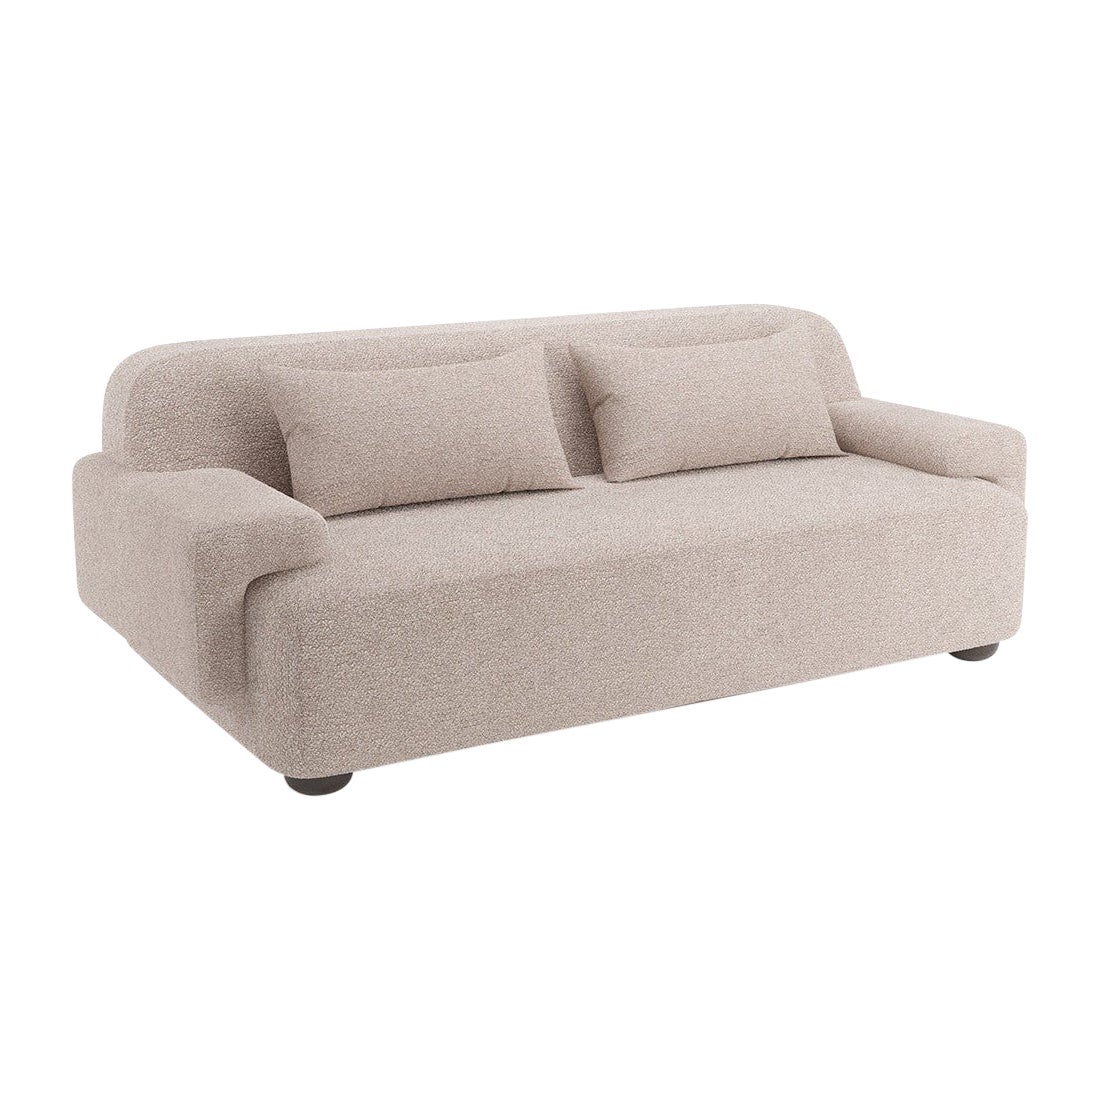 Popus Editions Lena 3 Seater-Sofa in Mole Taupe mit Malmoe Terry-Polsterung